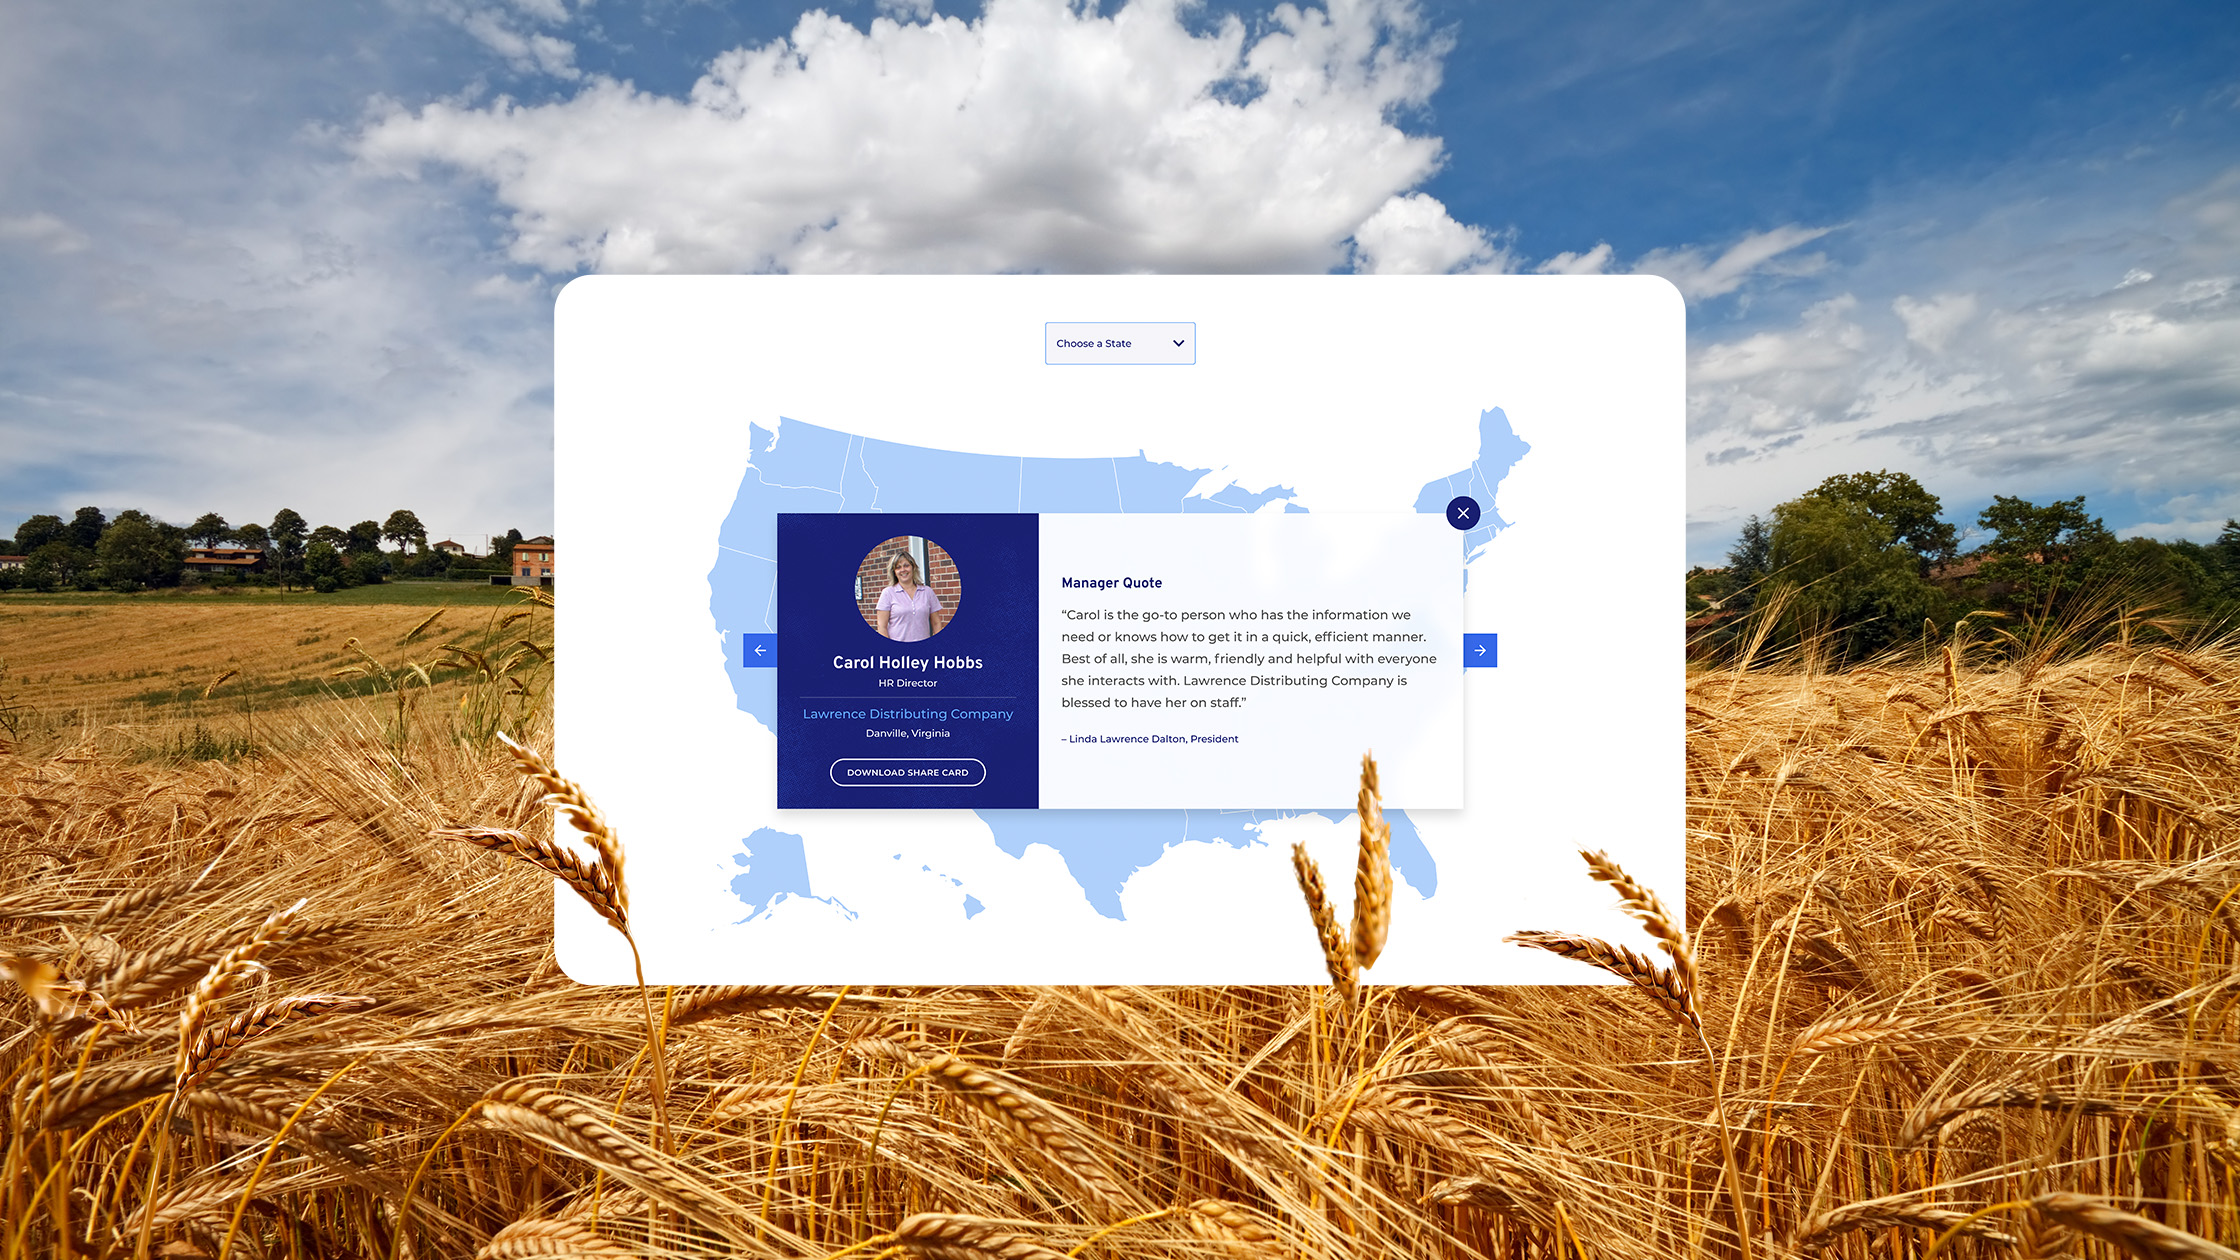 A digital interface is displayed on a backdrop of a golden wheat field under a blue sky. The interface shows a map of the United States with a highlighted profile for "Carol Holly Hoss" in blue, featuring a quote and two links at the bottom for leadership nominations.